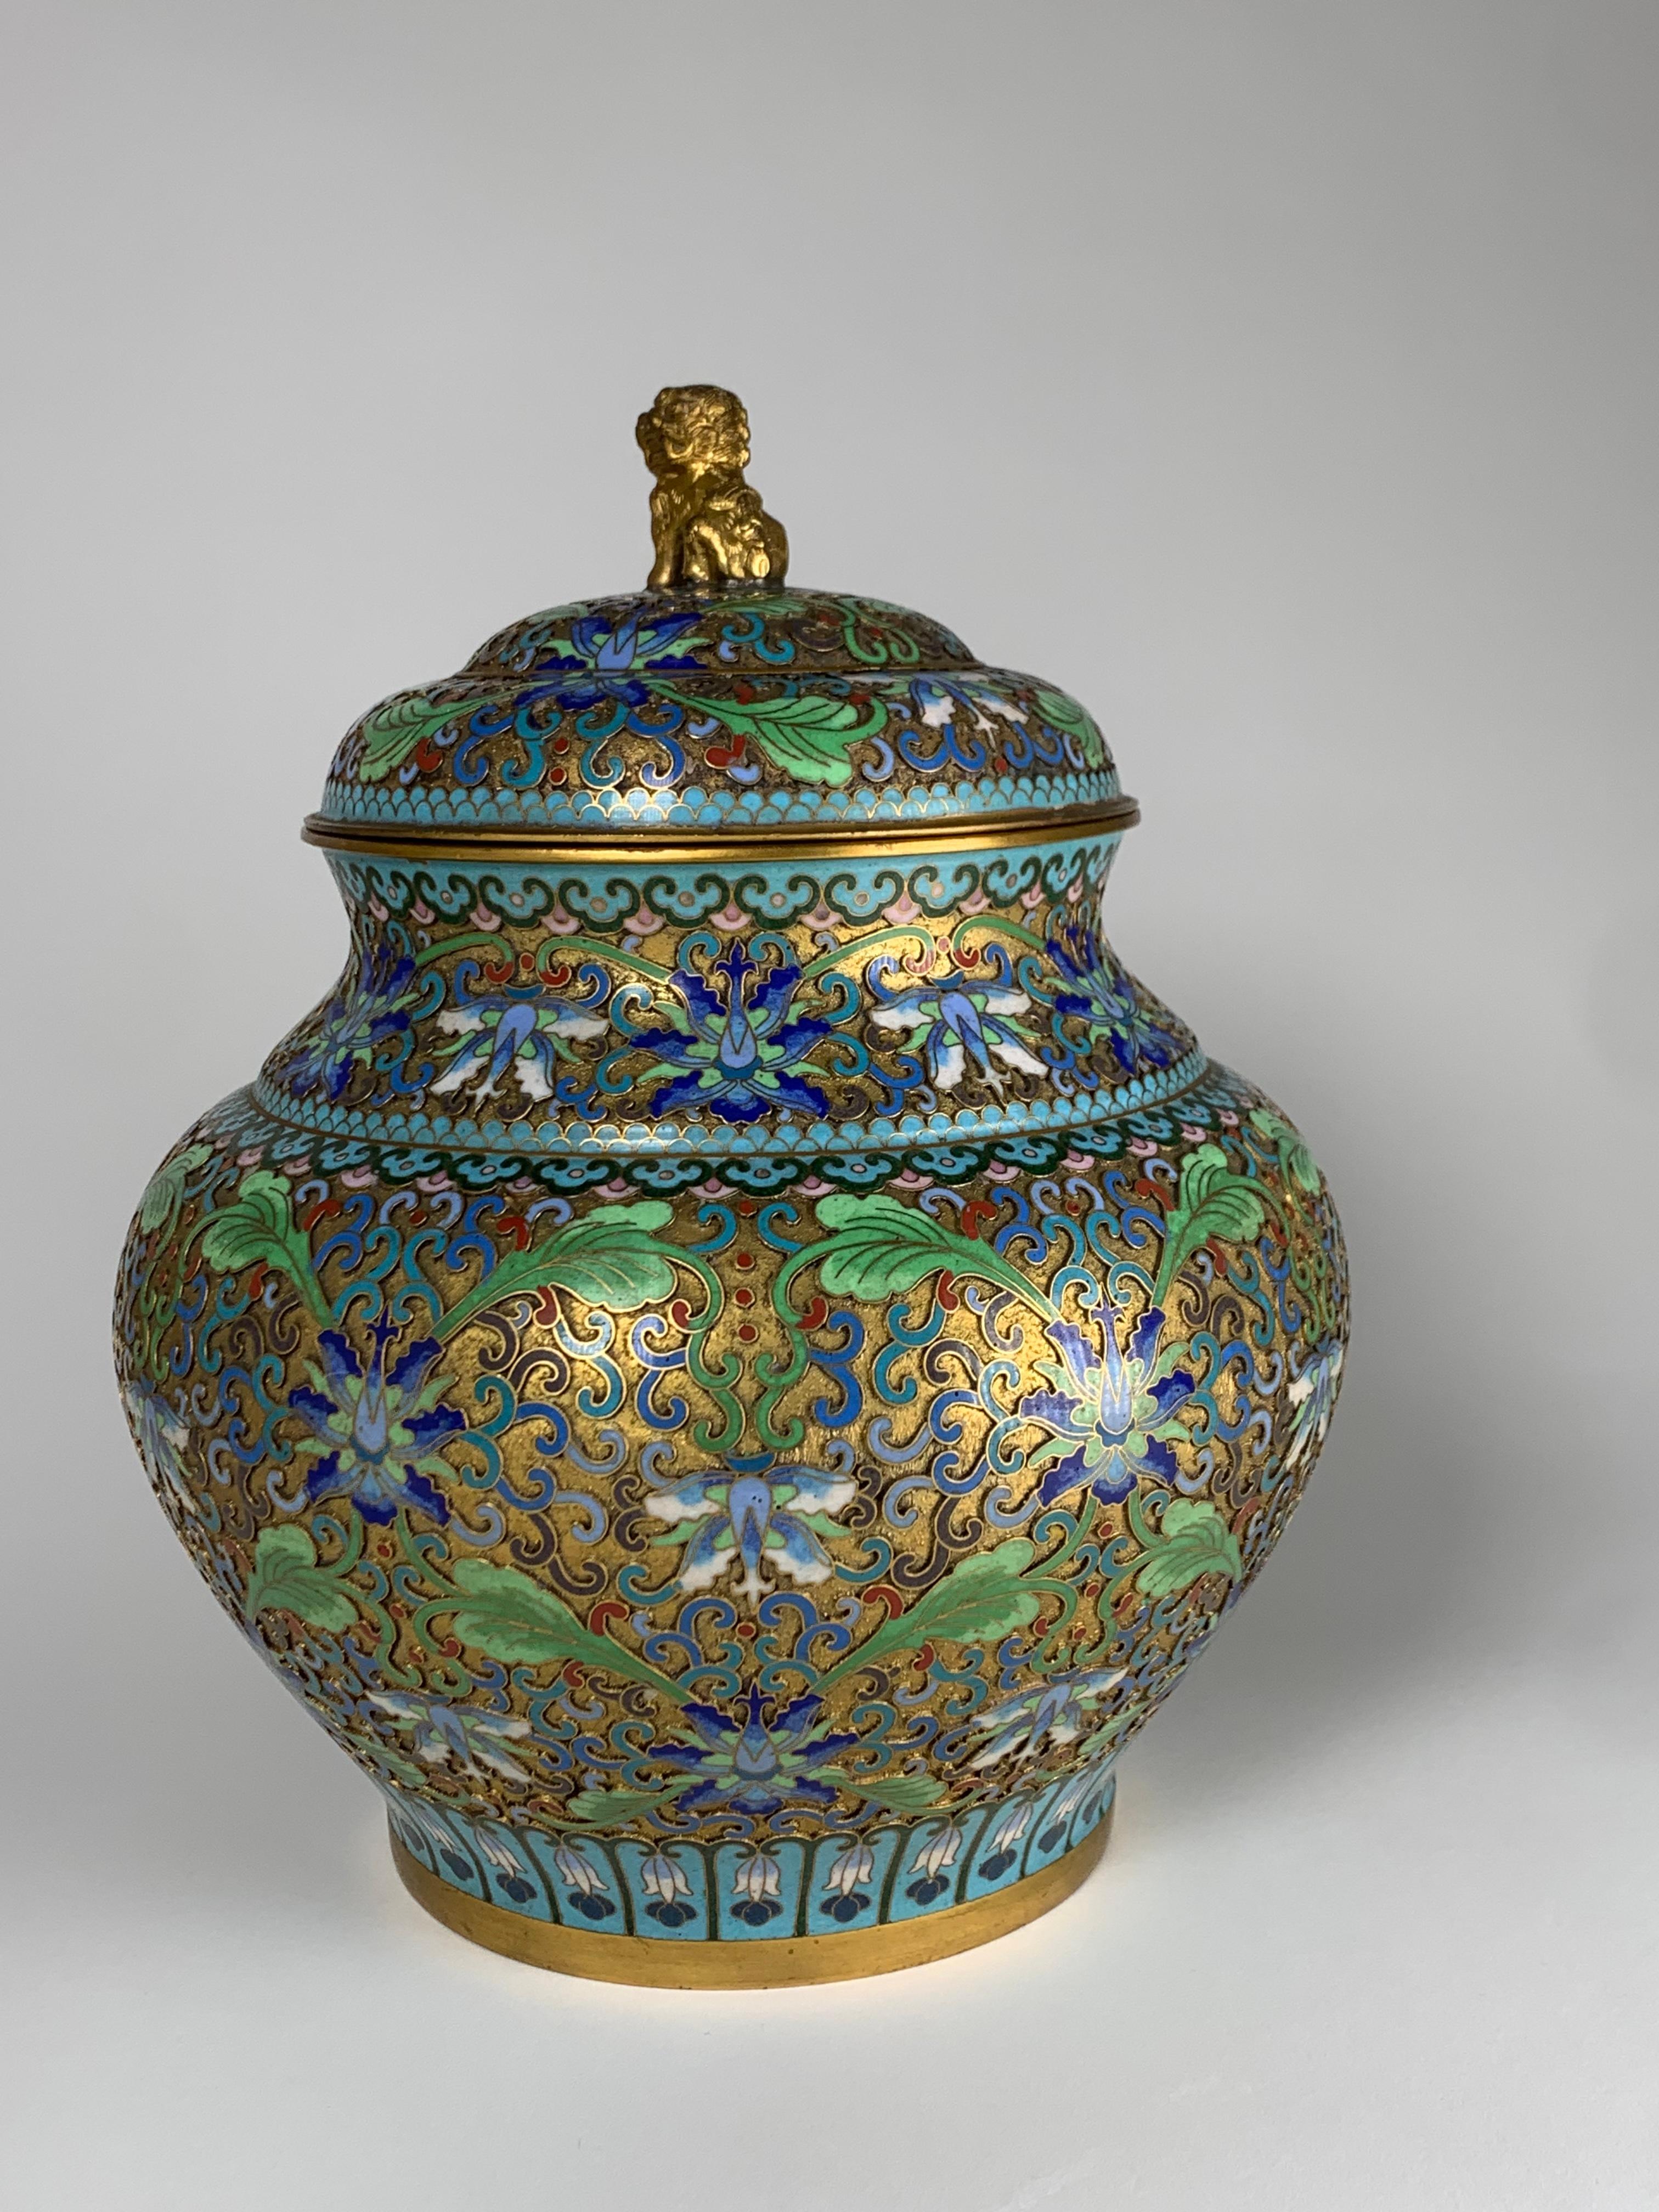 Chinese lidded vase in cloisonne and gilt bronze enamel, probably from the first half of the 20th century. The domed lid with finial in the shape of a seated Buddhist lion overlooks the lid and the profusely decorated body.
The inside of the vase,